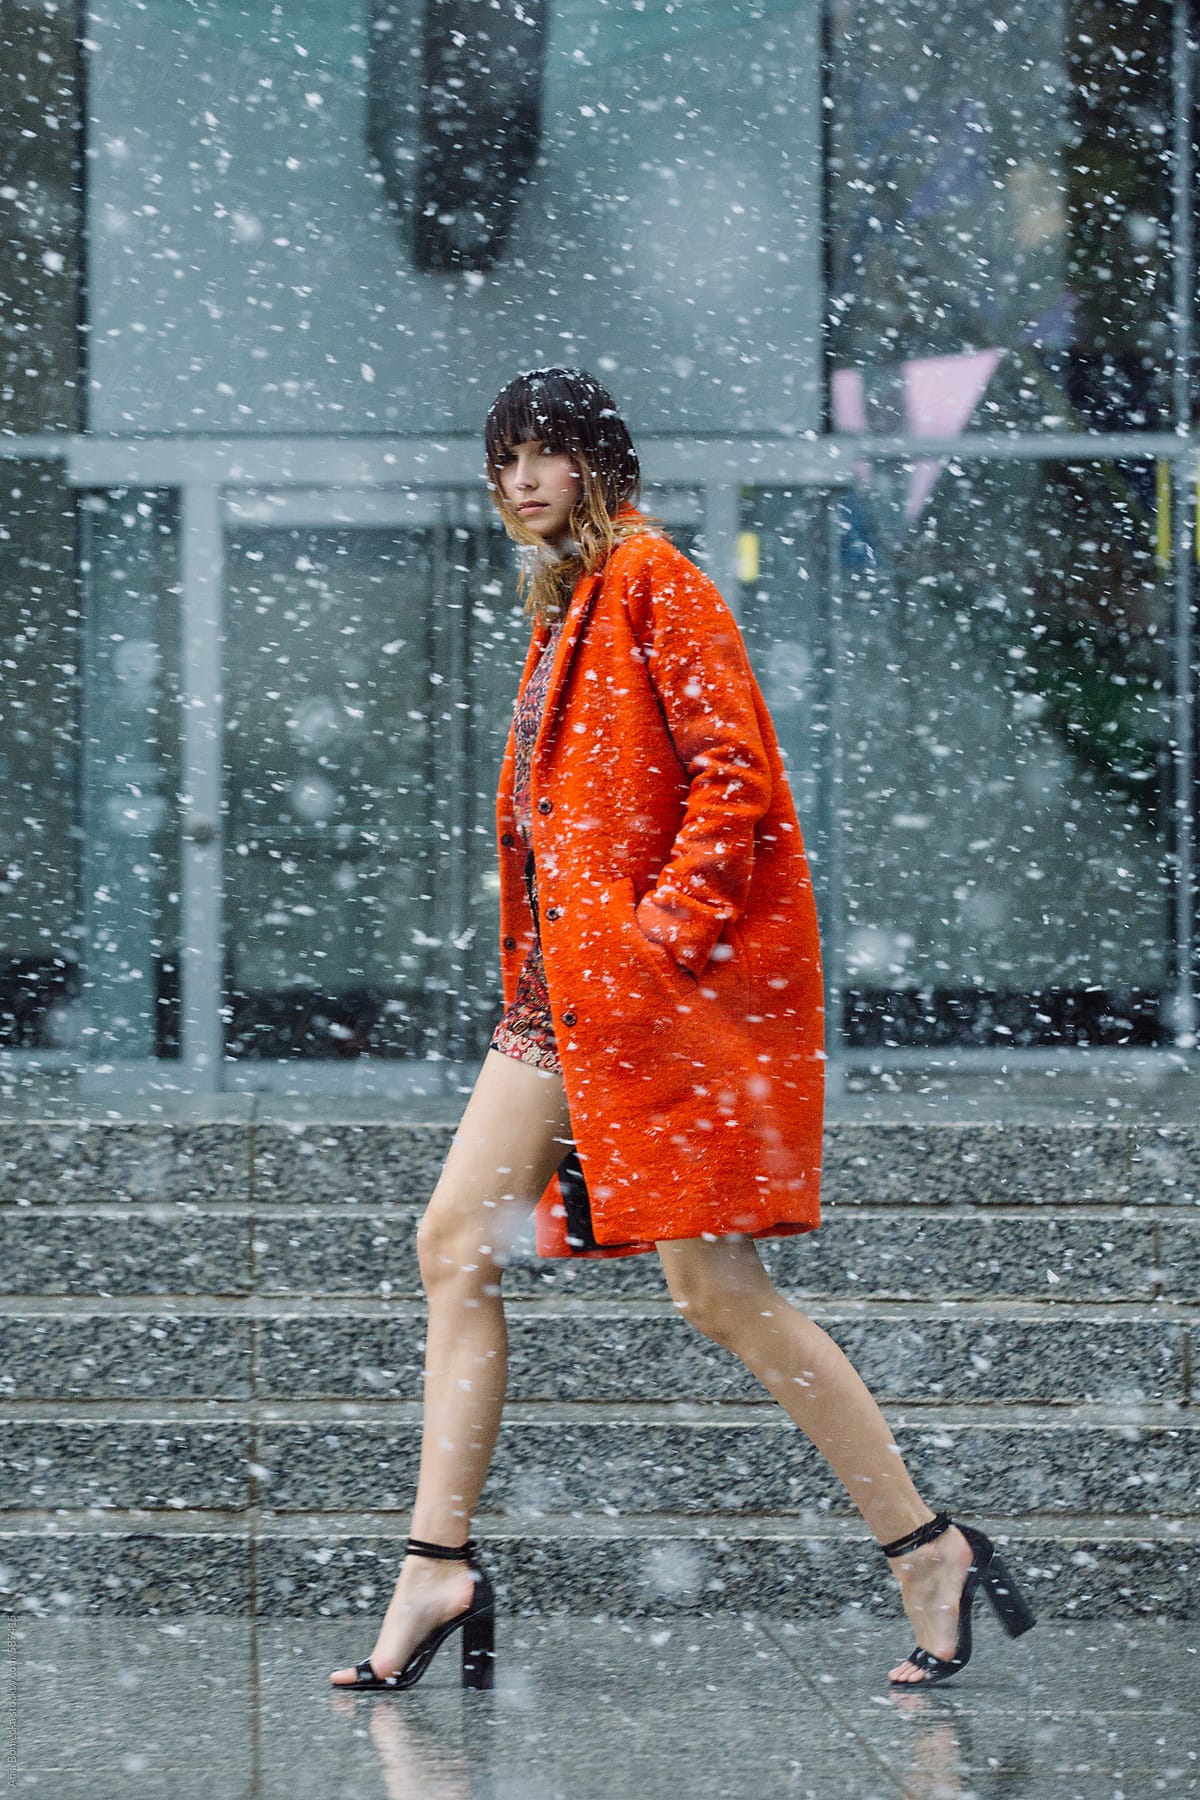 Bright orange jacket in the falling snow